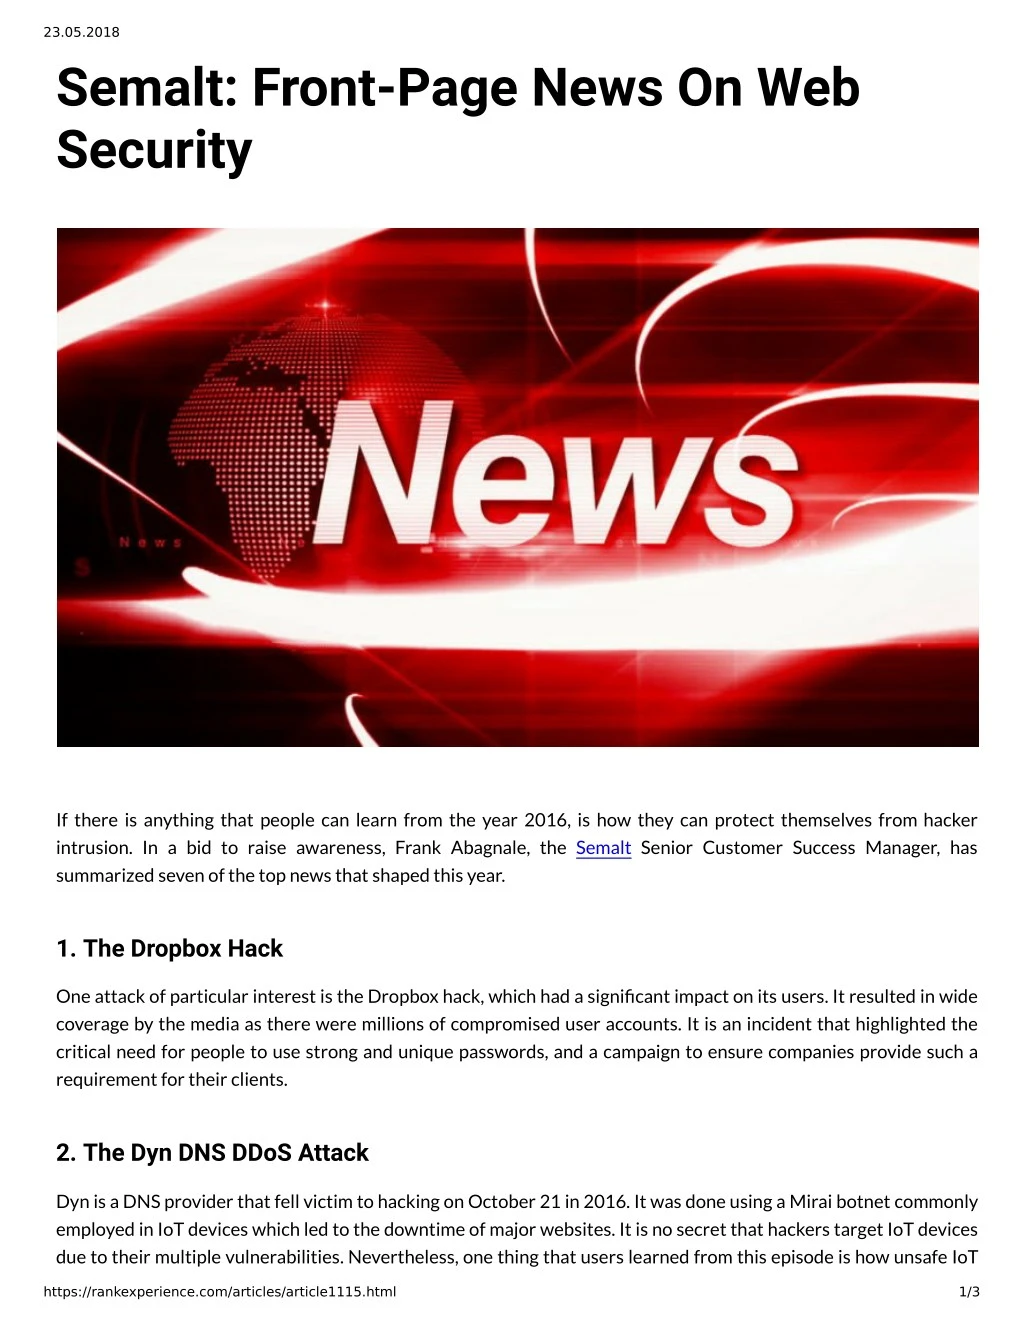 23 05 2018 semalt front page news on web security